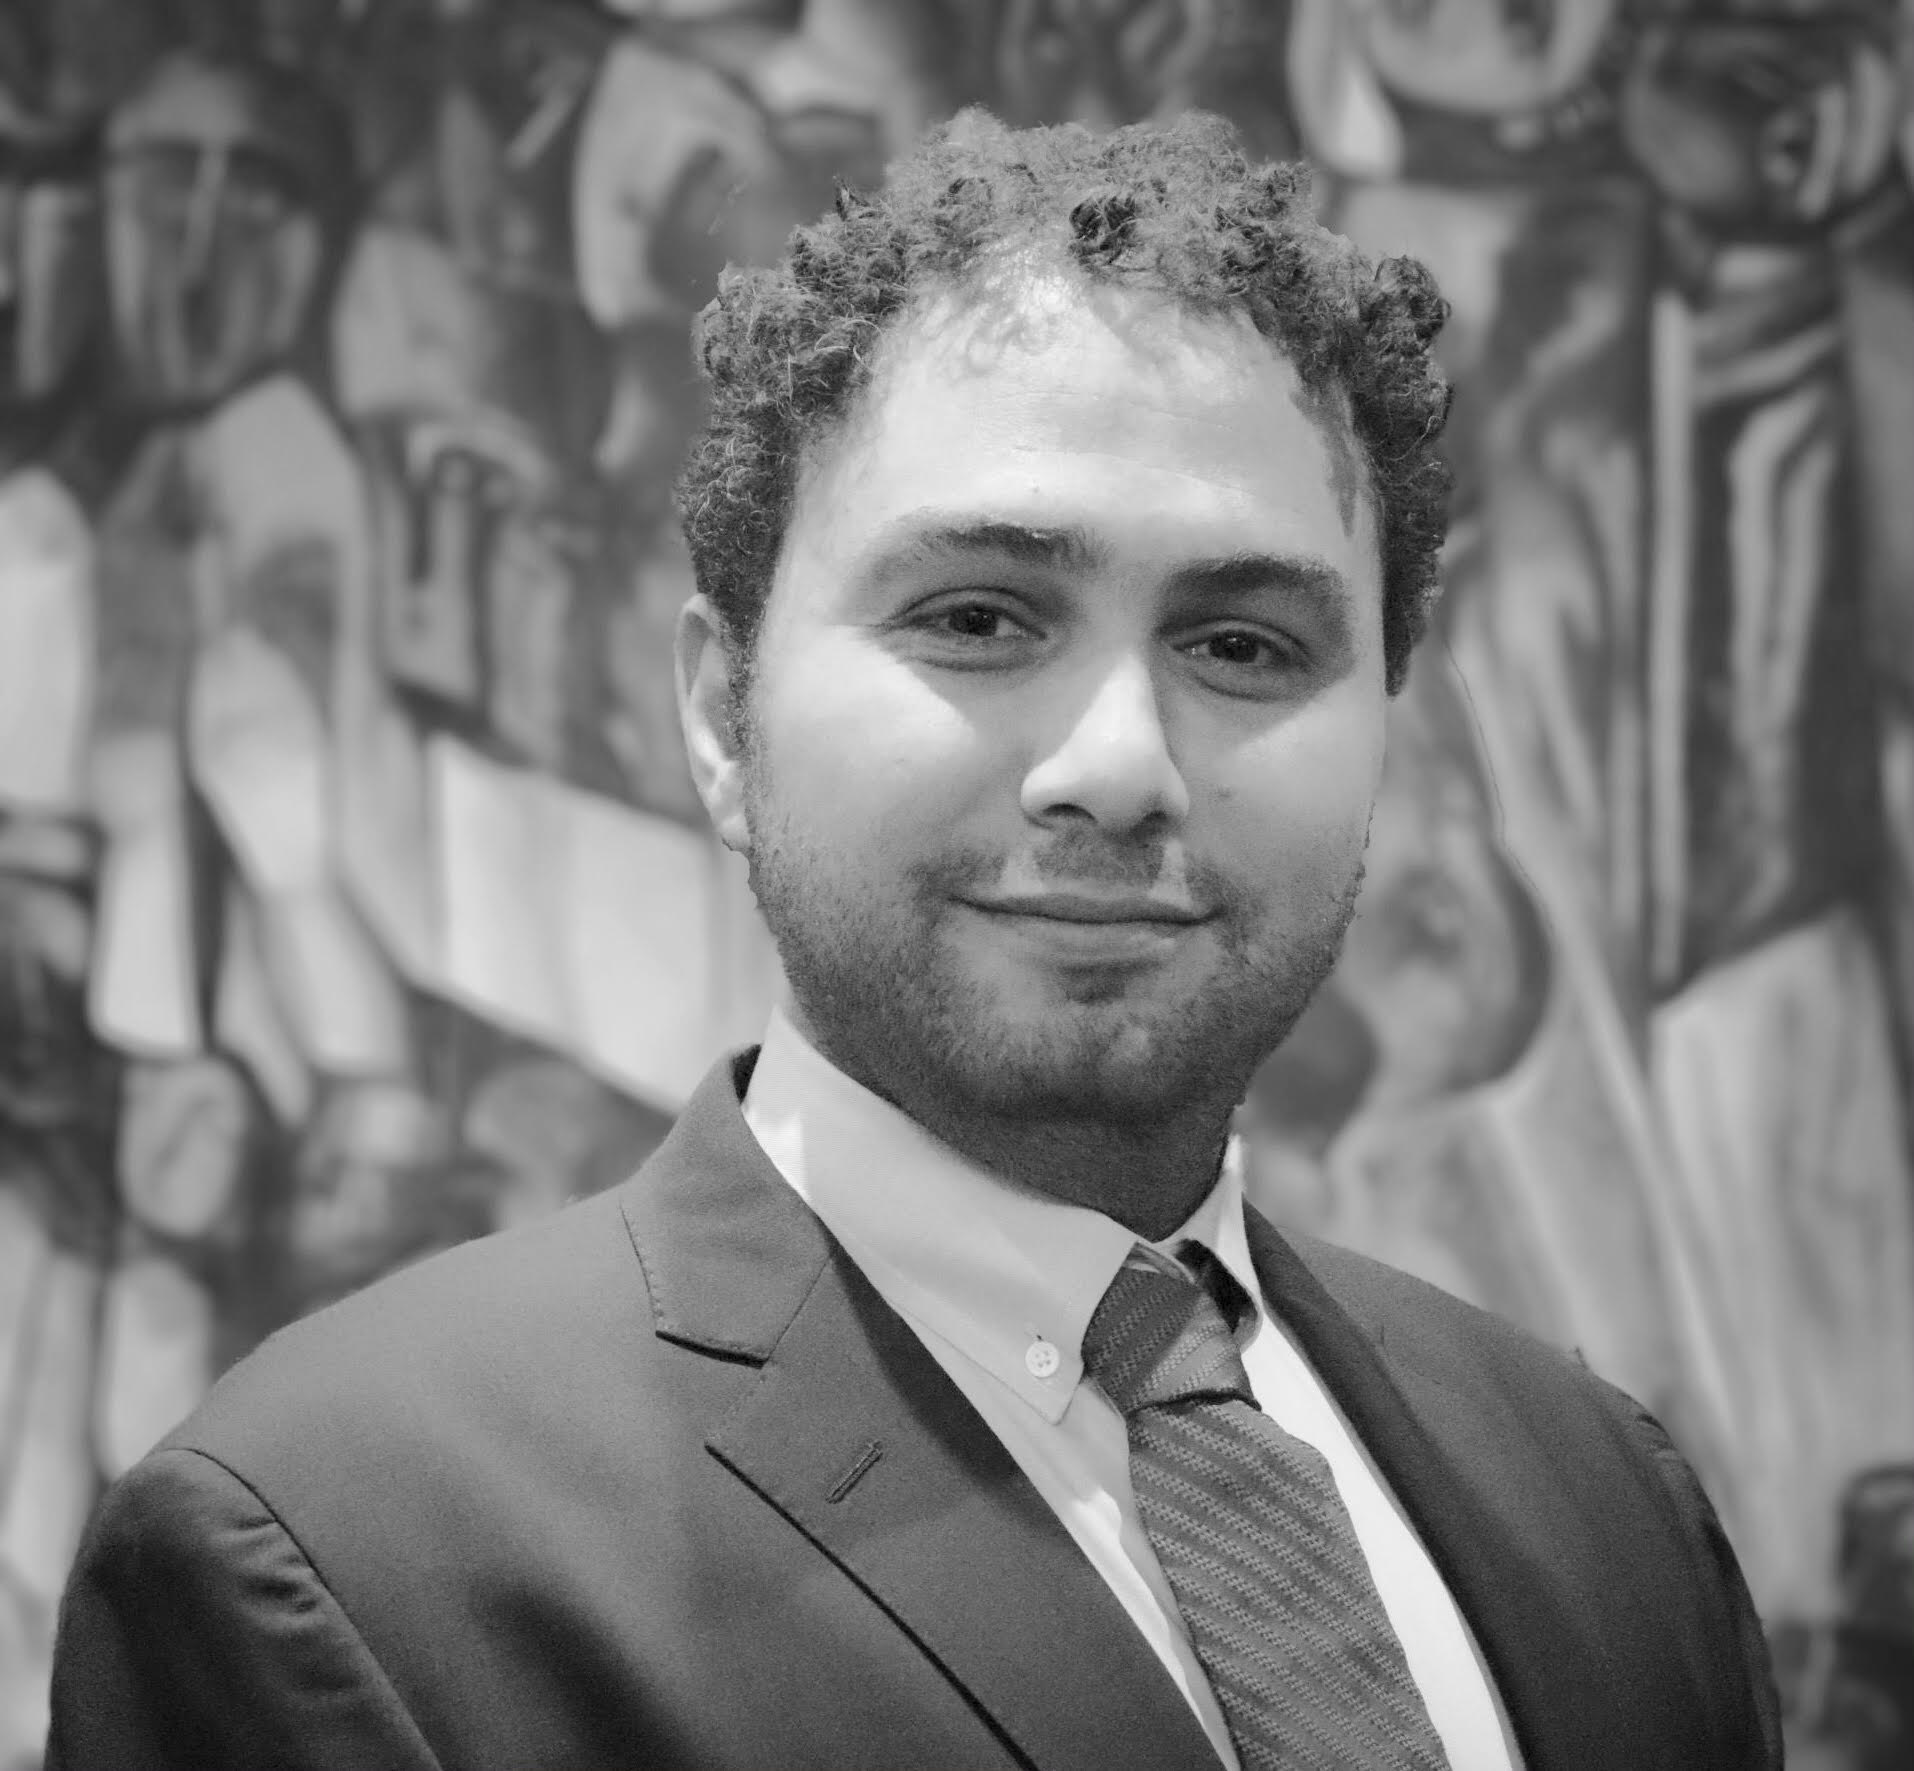 You are currently viewing Shalakany is delighted to announce that Adam El Shalakany, Senior Partner, has been selected as a recipient of the Africa’s 50 Most Promising Young Arbitration Practitioners 2020 Award by the Association of Young Arbitrators.